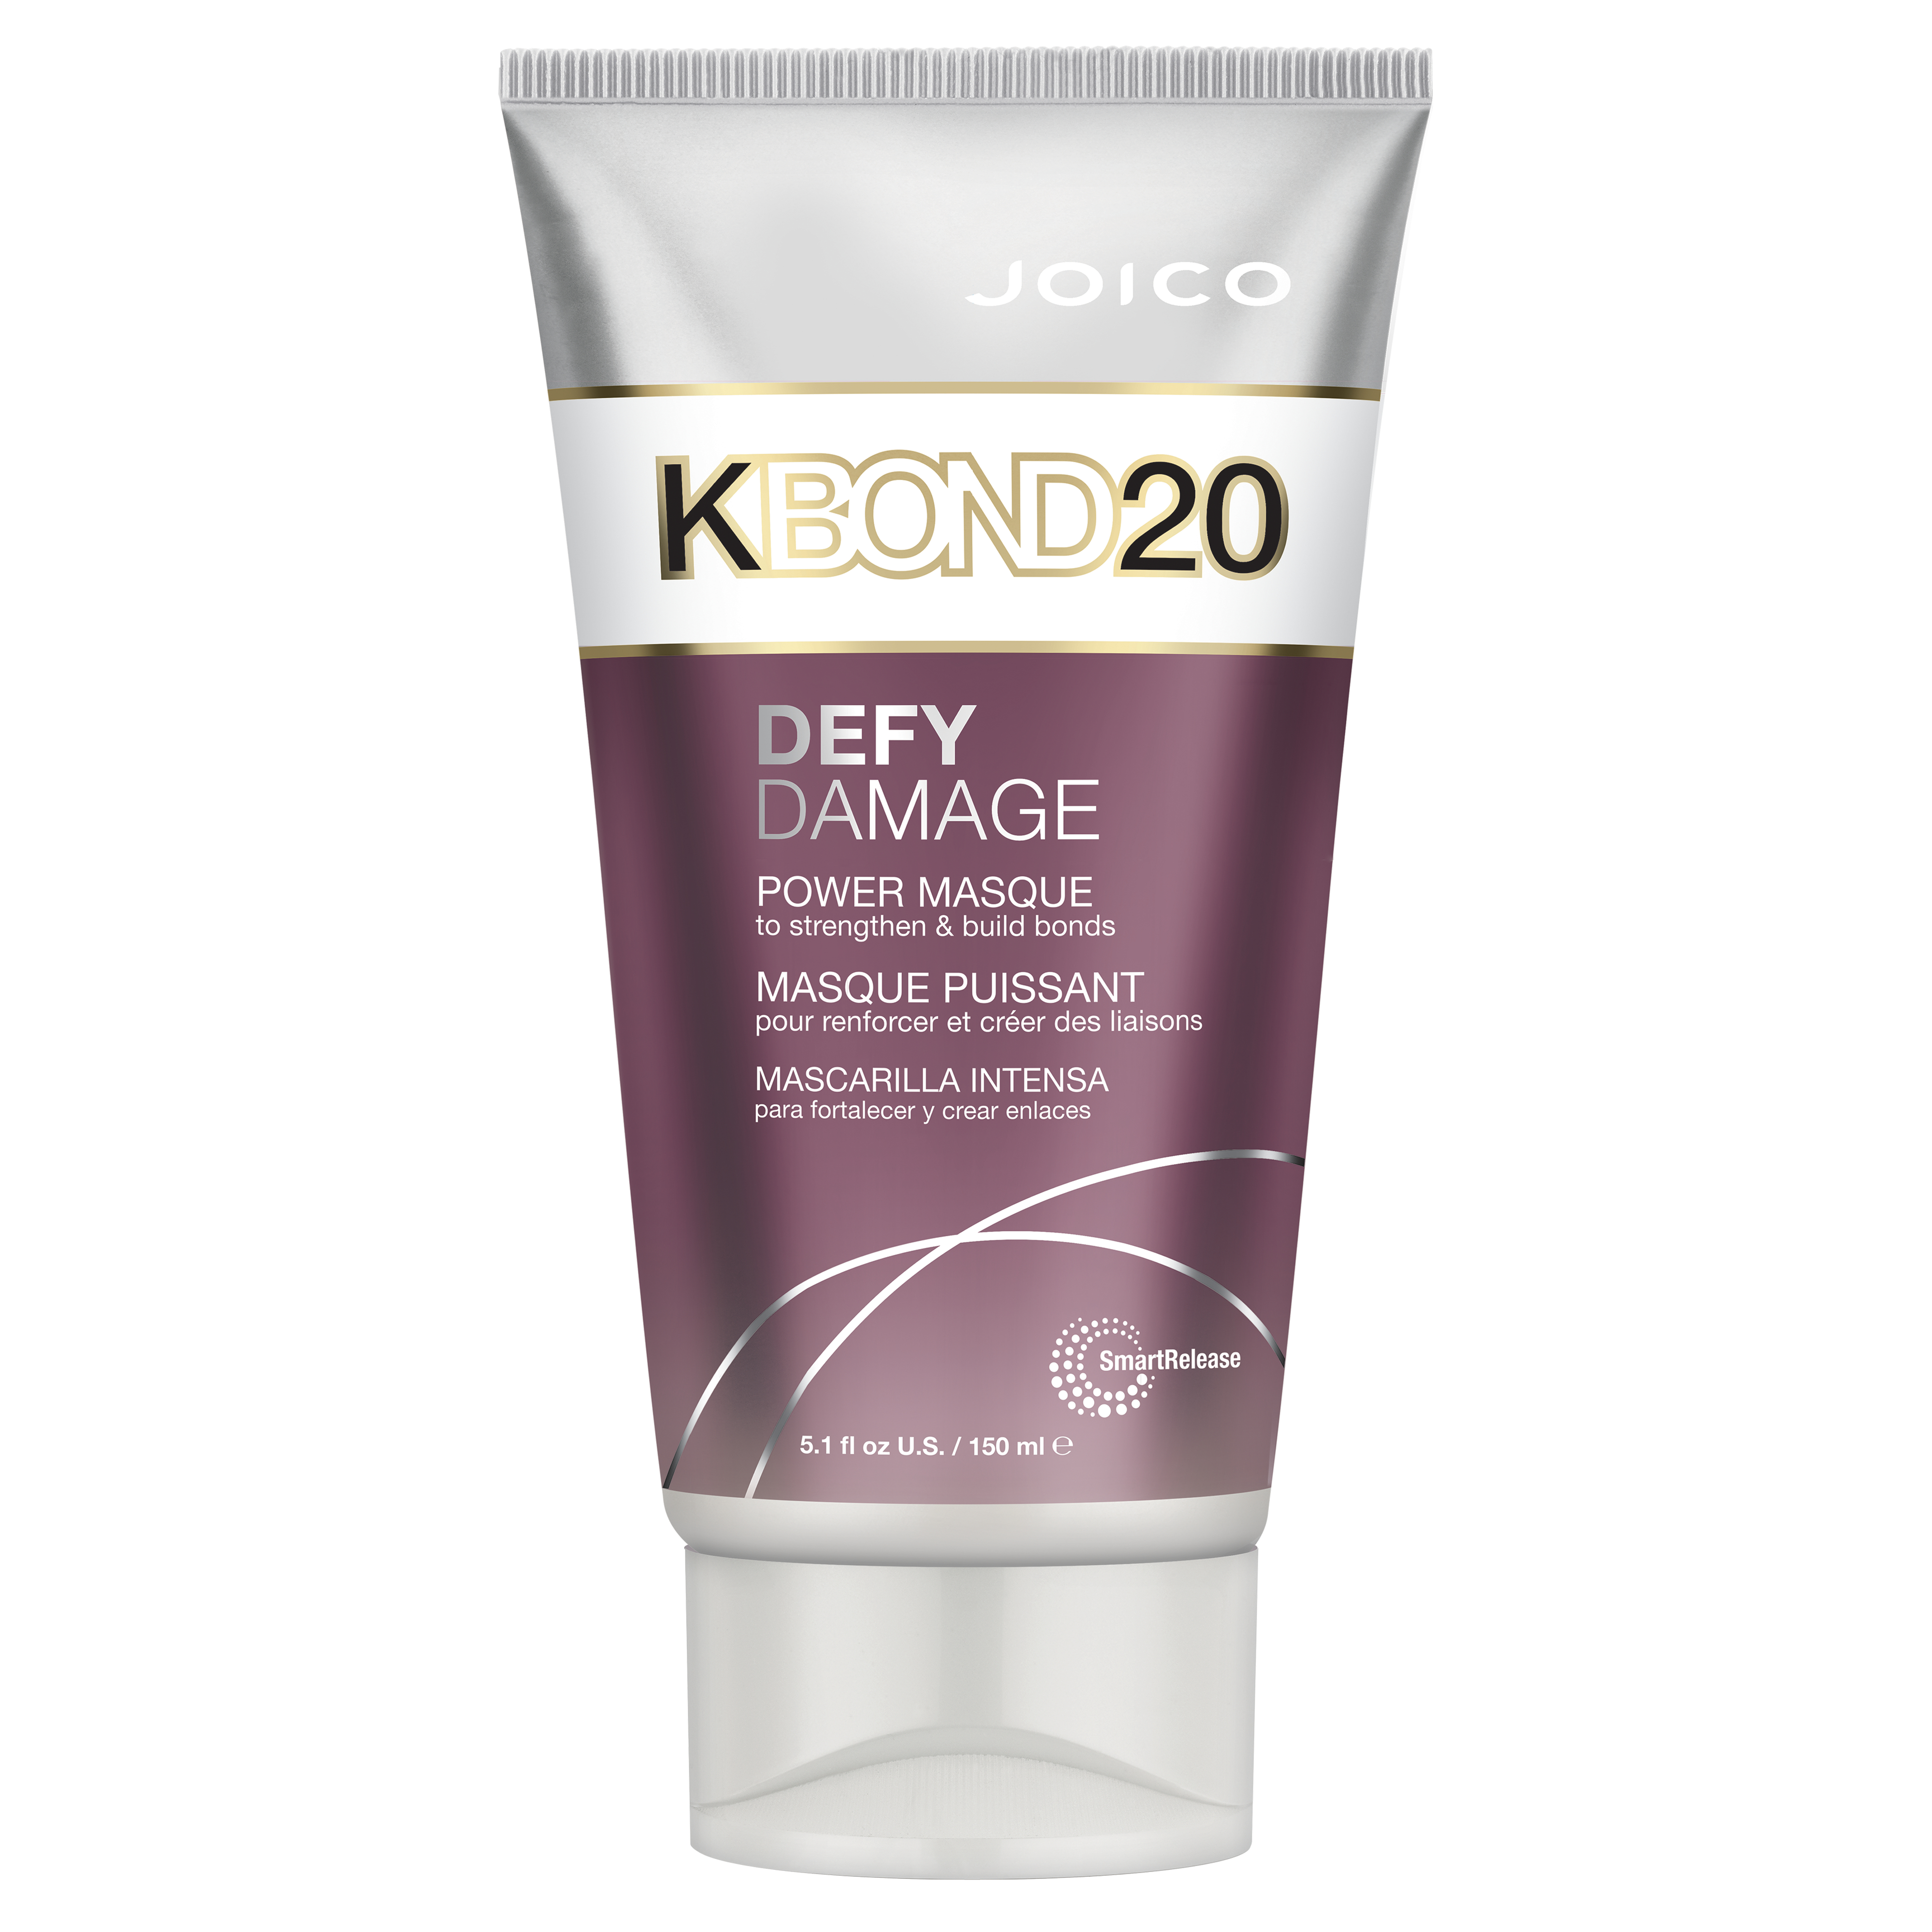 Joico Launch KBOND20 Power Masque For Five Times Stronger Hair in One Use